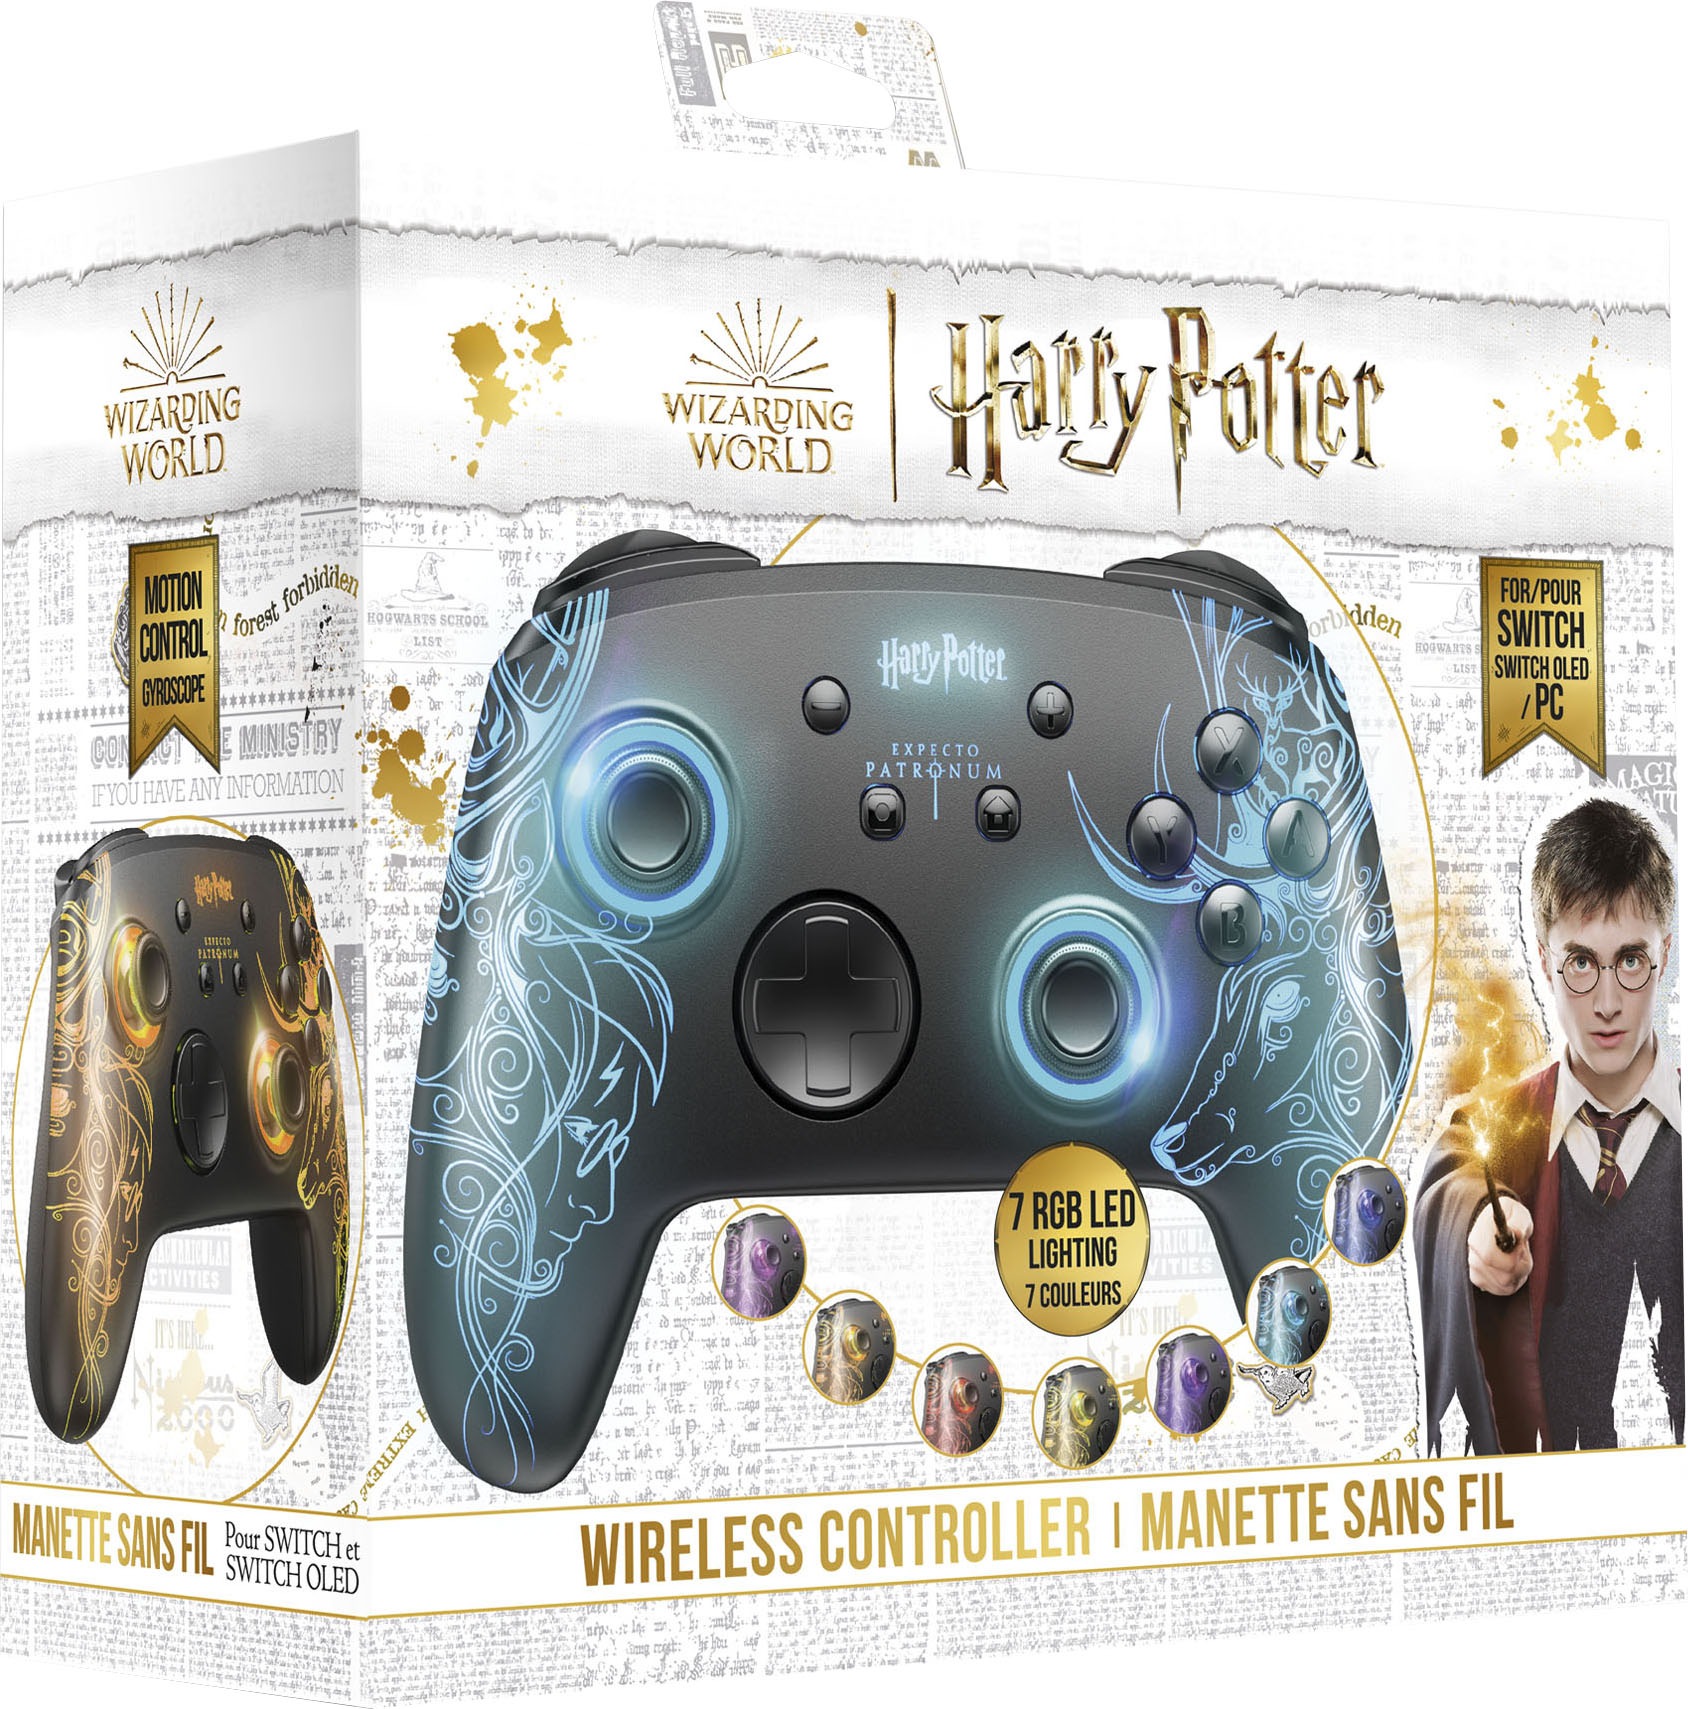 jetzt bei Potter and online »Harry Patronus Geeks Freaks Stag Nintendo-Controller OTTO Wireless«